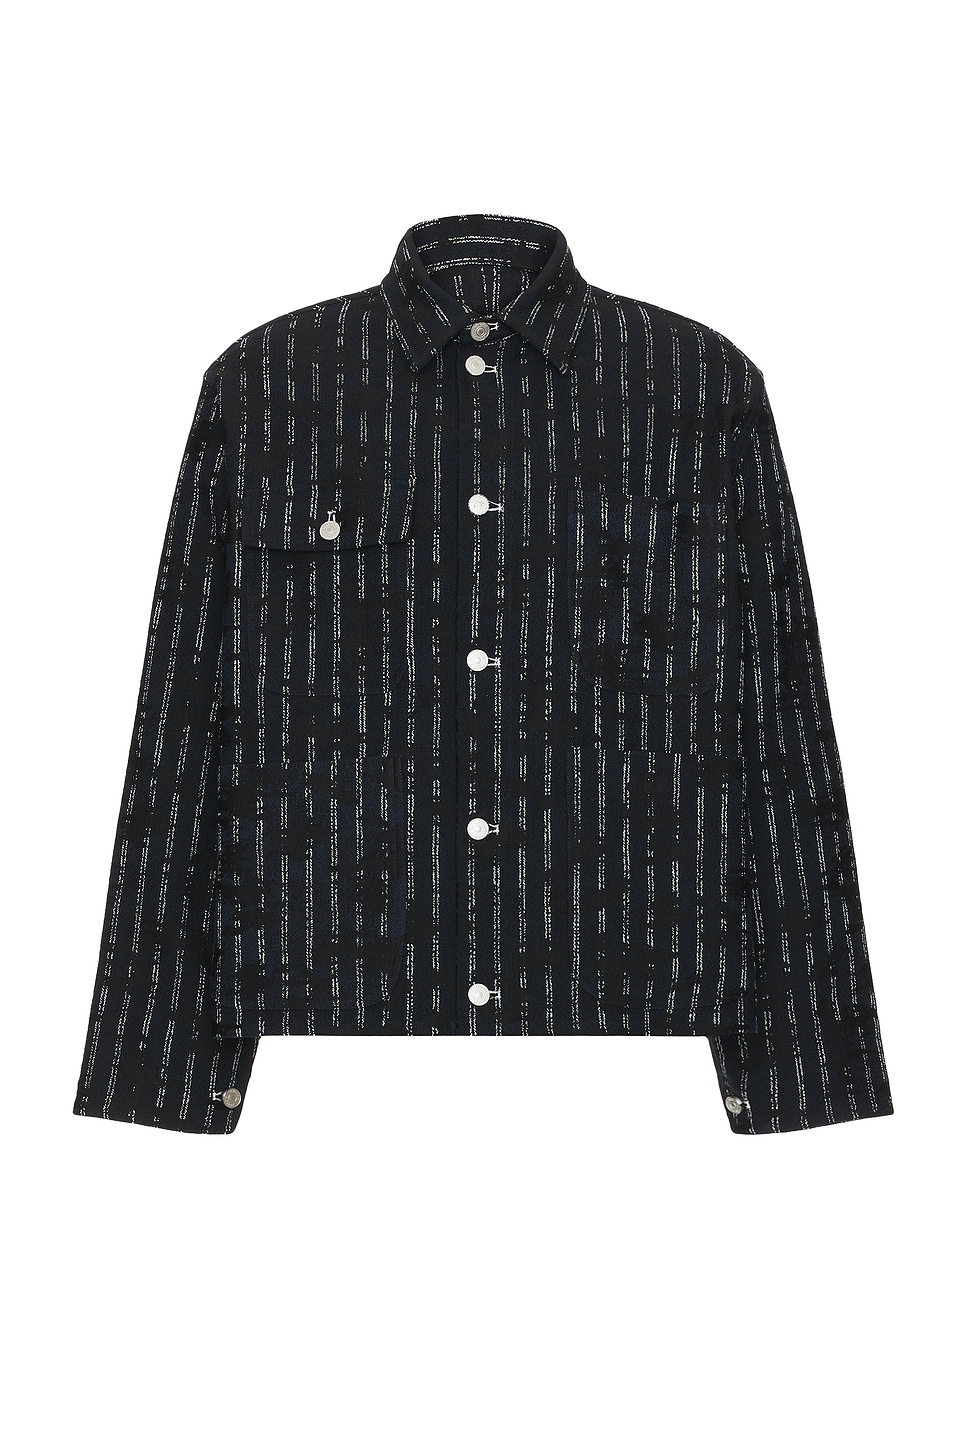 Image 1 of 4SDESIGNS Utility Jacket in Navy